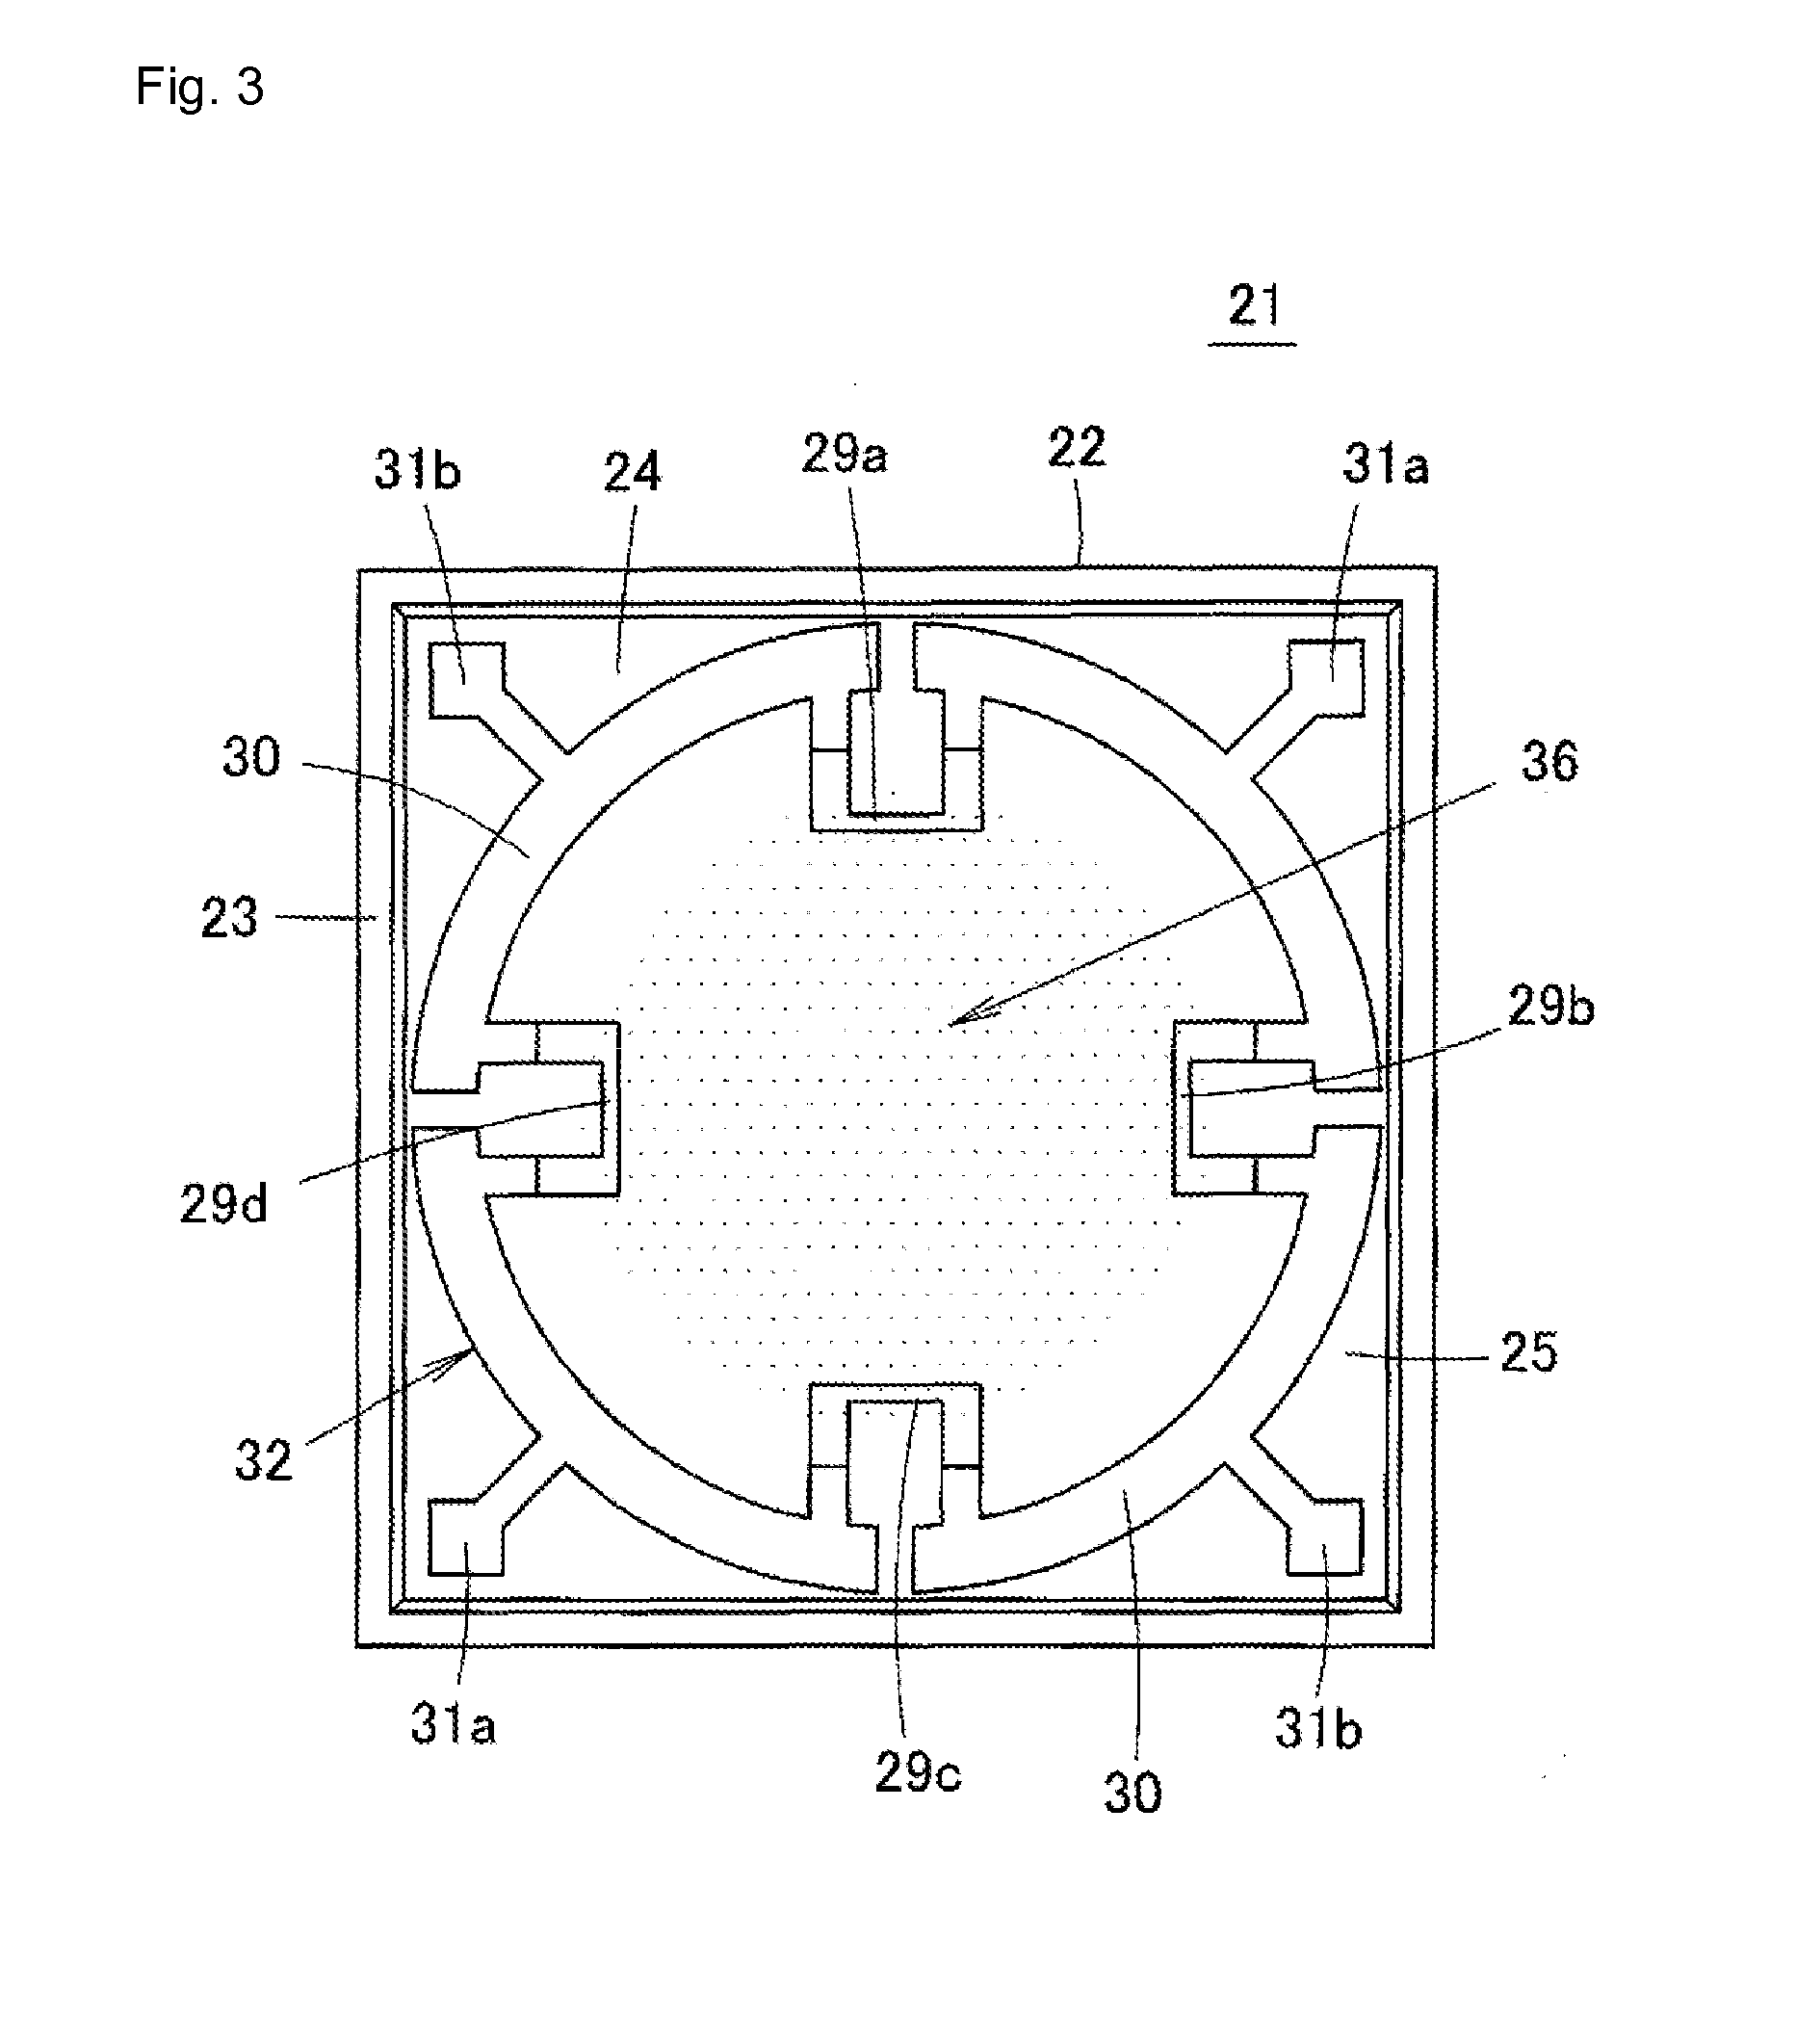 Surface potential sensor and copying machine